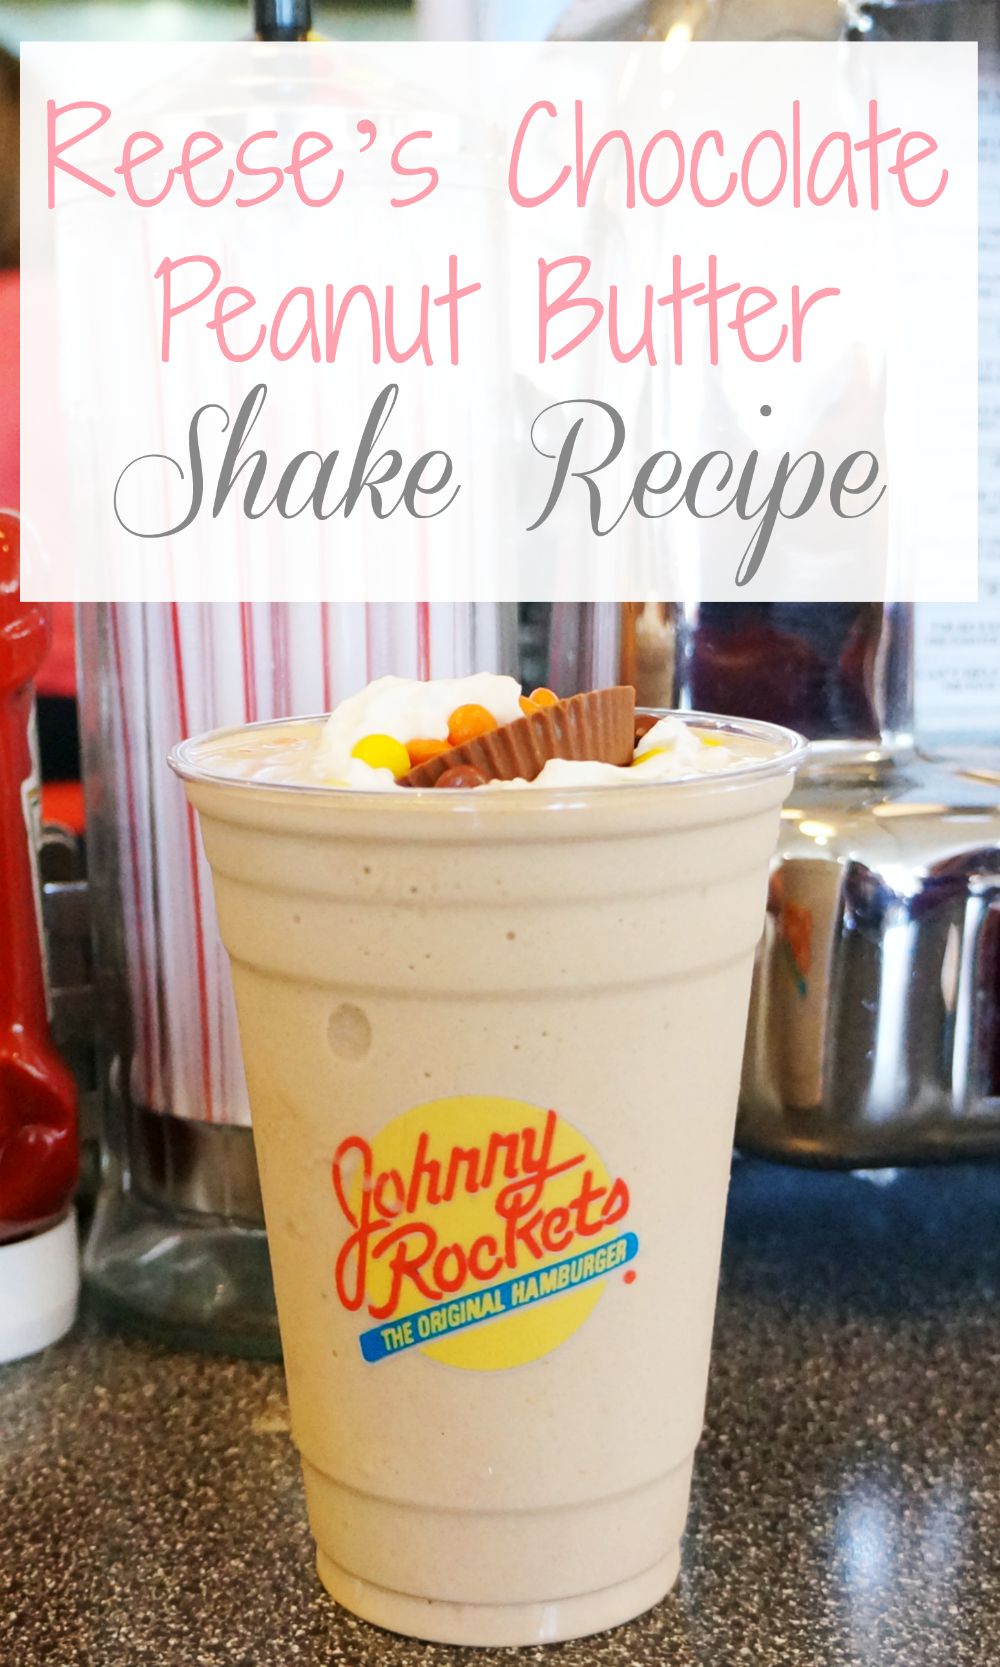 How to make Johnny Rockets Reese’s Chocolate Peanut Butter Shake recipe | #JohnnyRockets #ReesesMilkshake #MilkshakeRecipe #PeanutButterMilkshake #JohnnyRocketsShake #JohnnyRocketsCopyCatShake